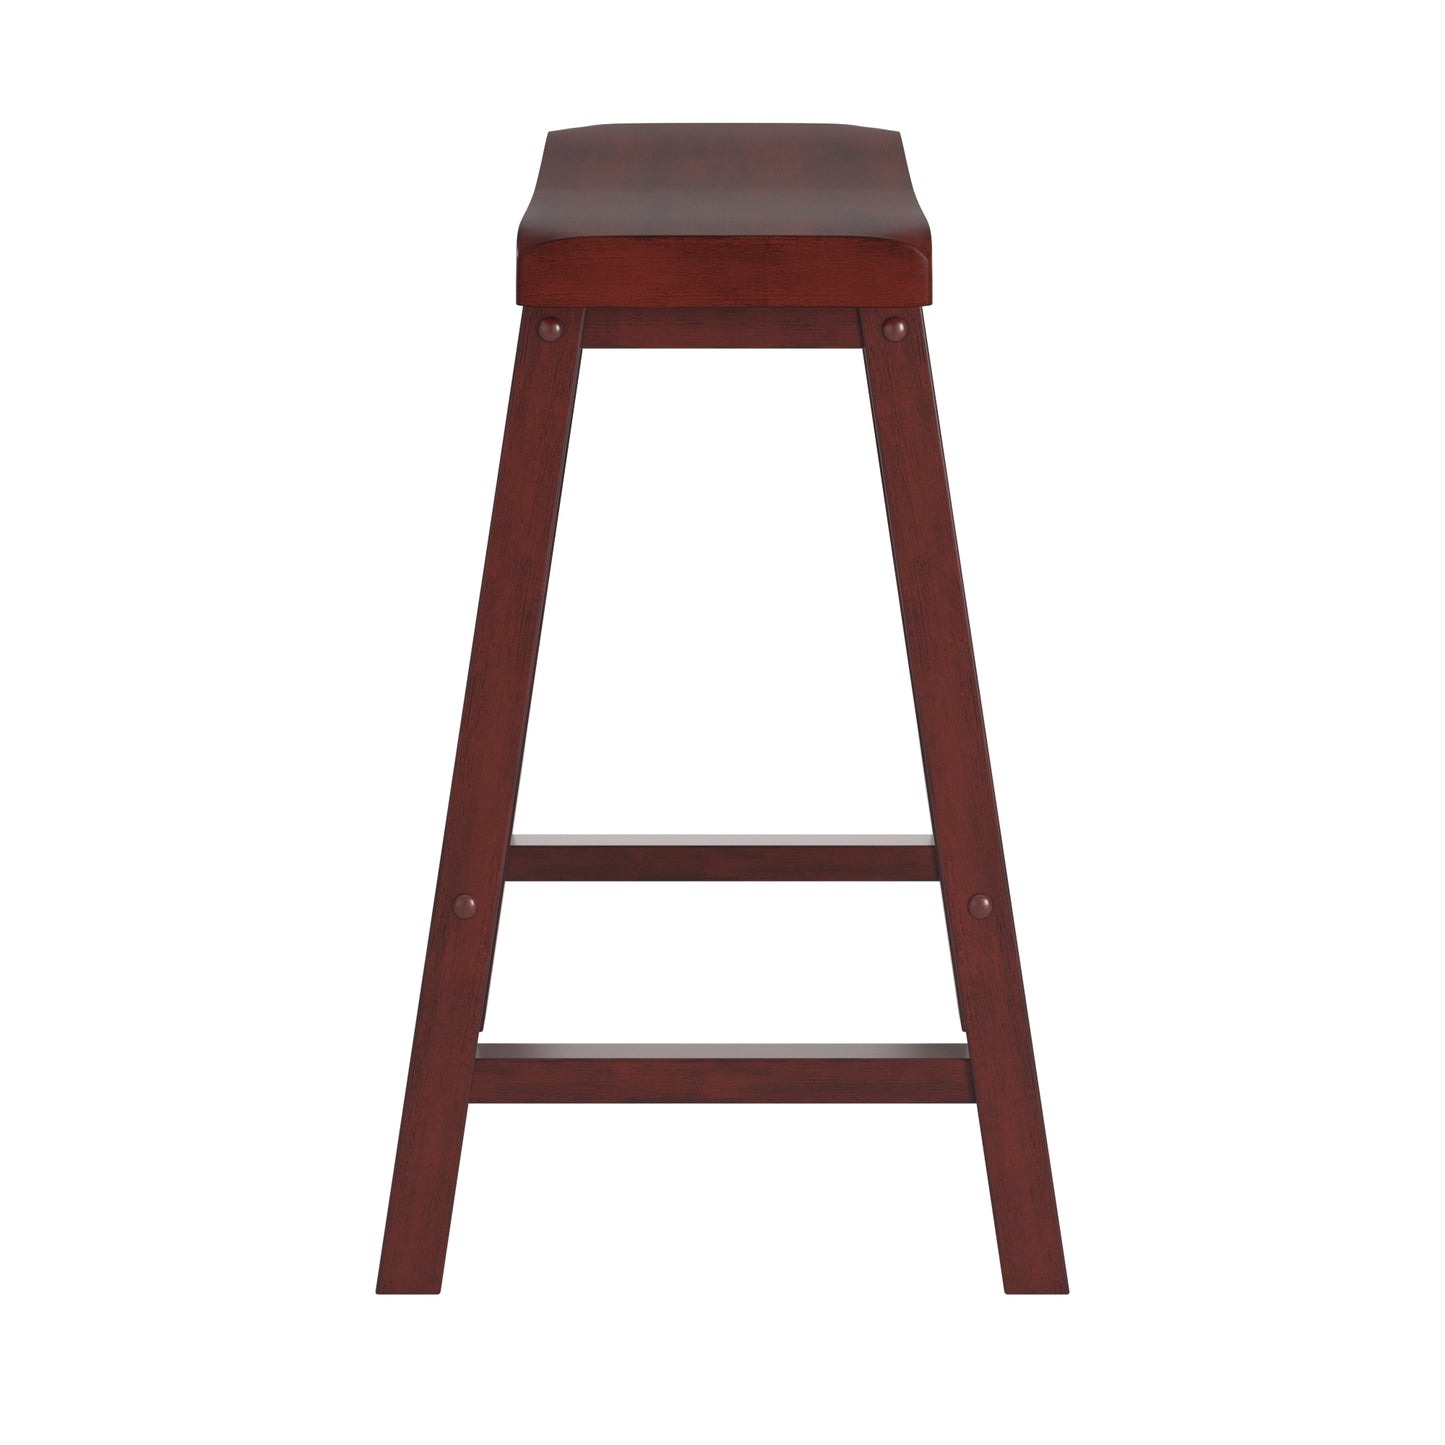 Saddle Seat 24" Counter Height Backless Stools (Set of 2) - Antique Berry Finish